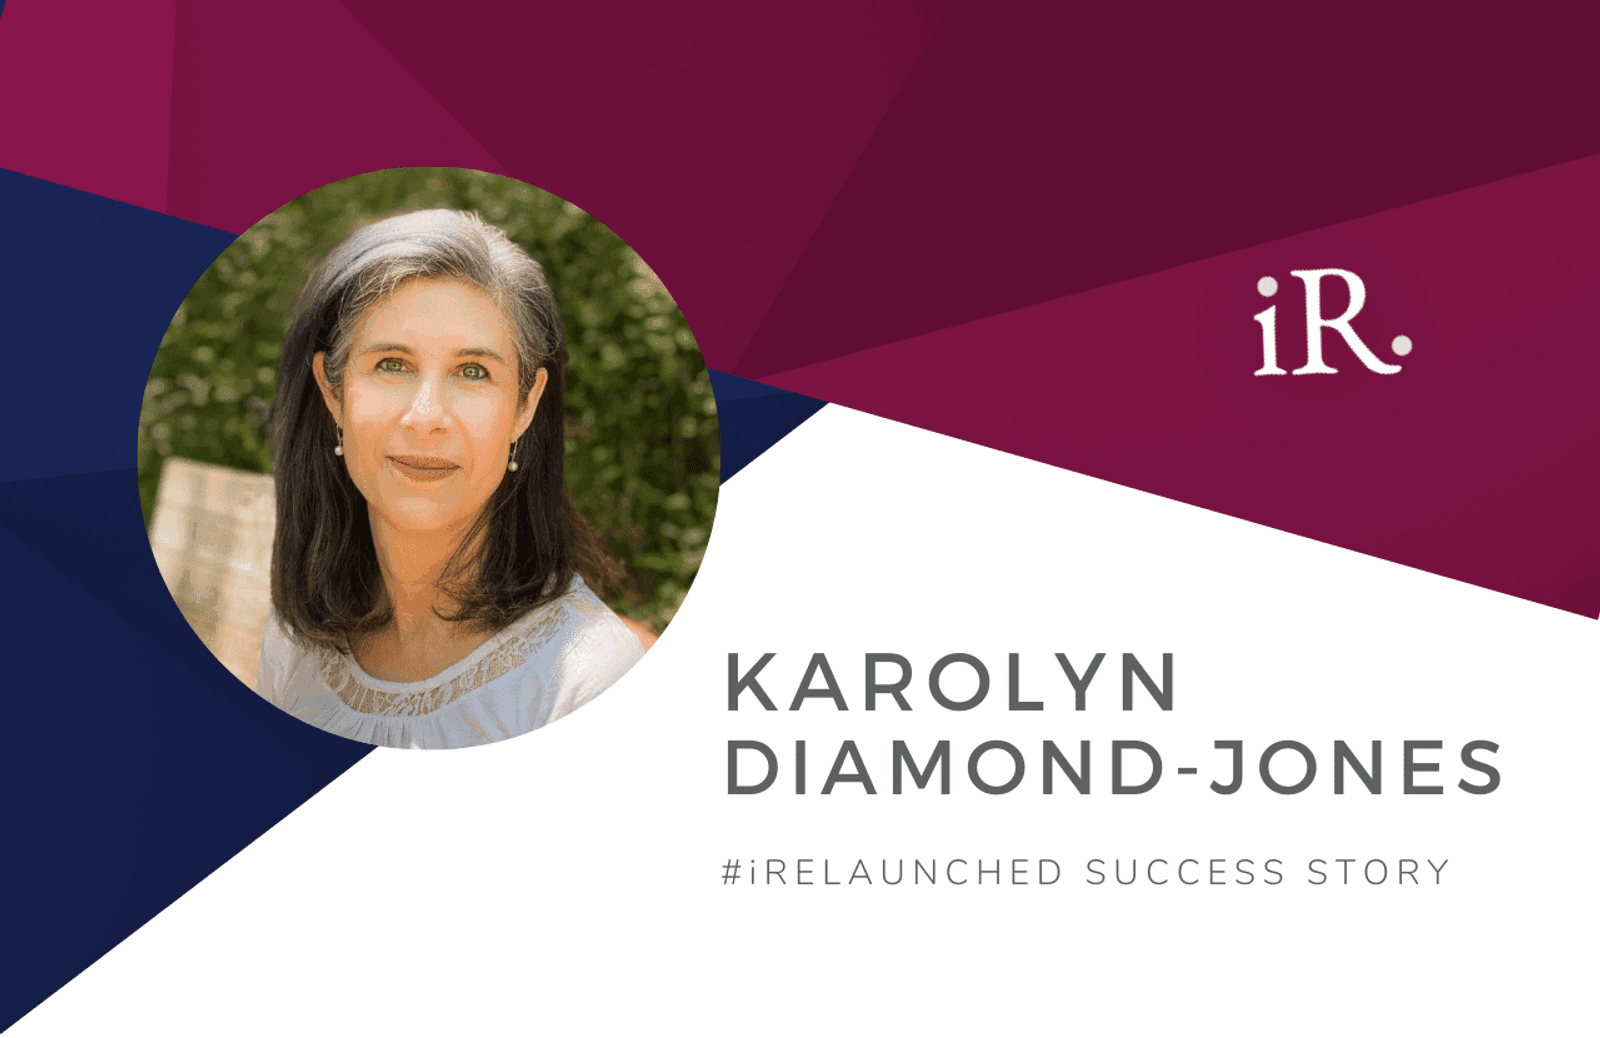 Karolyn Diamond Jone's headshot and the text #iRelaunched Success Story along with the iRelaunch logo.  A navy and maroon geometric textured background intersect behind Karolyn's headshot.